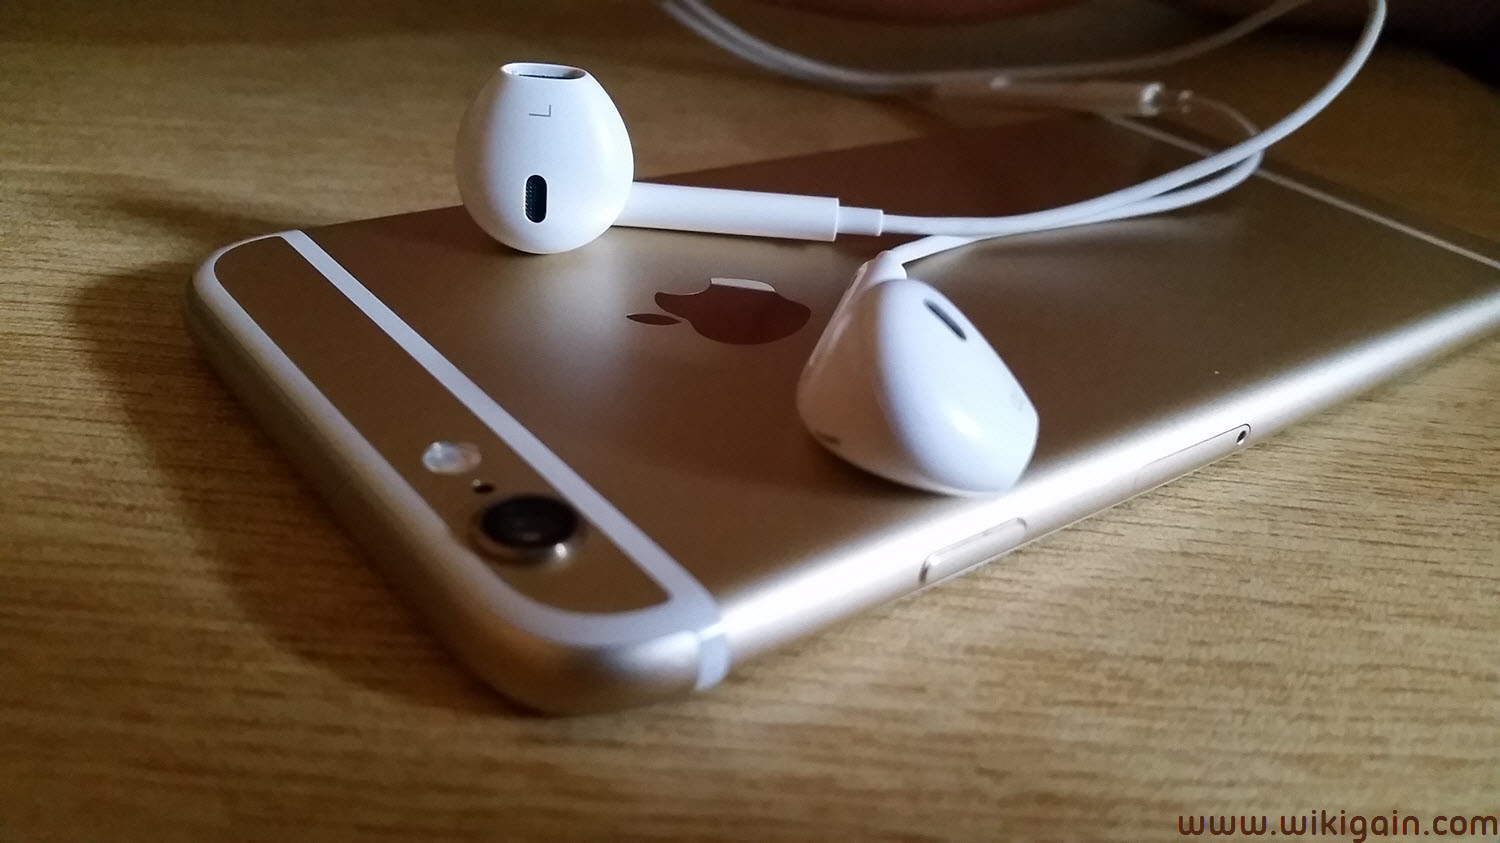 How to Control iPhone with HeadPhone